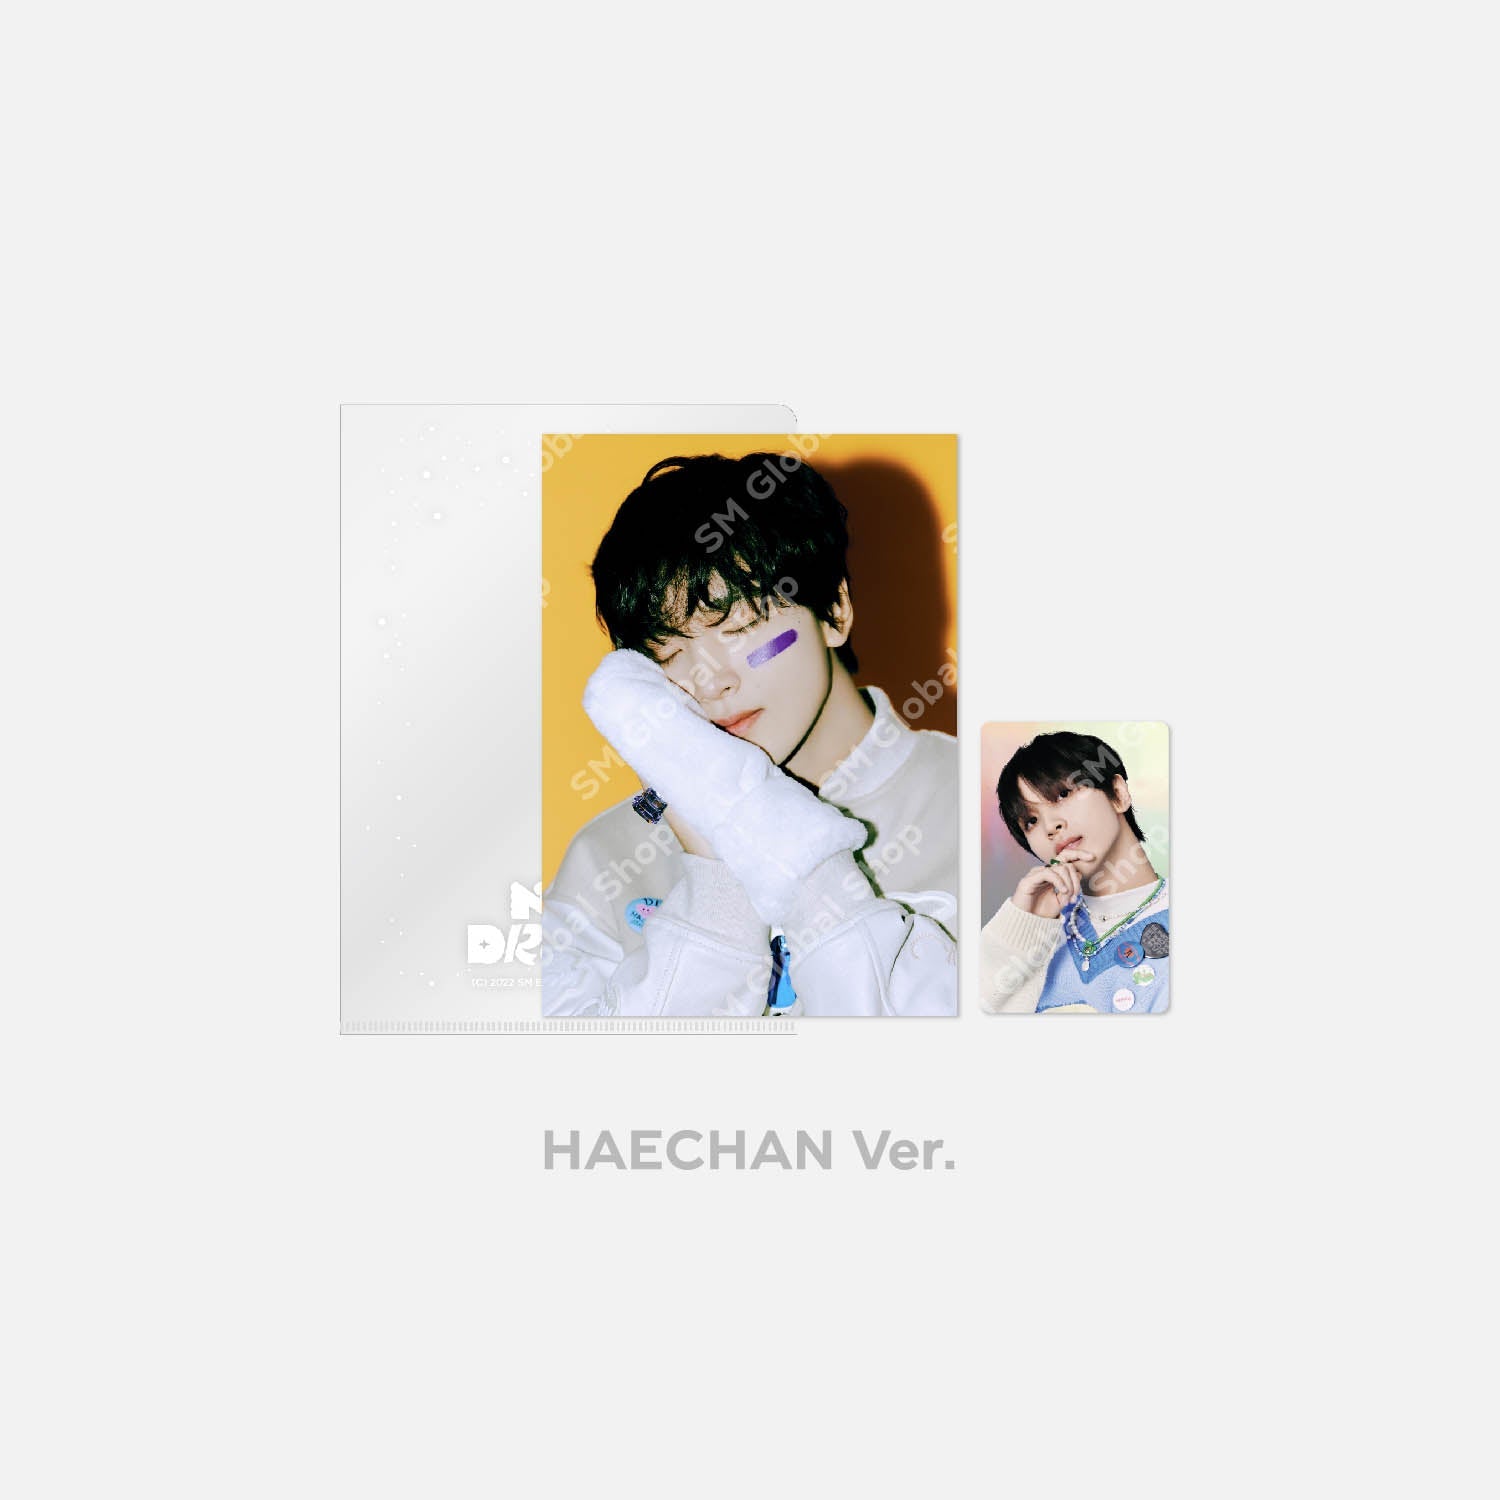 A picture of an album cover with the name hachan on it - NCT